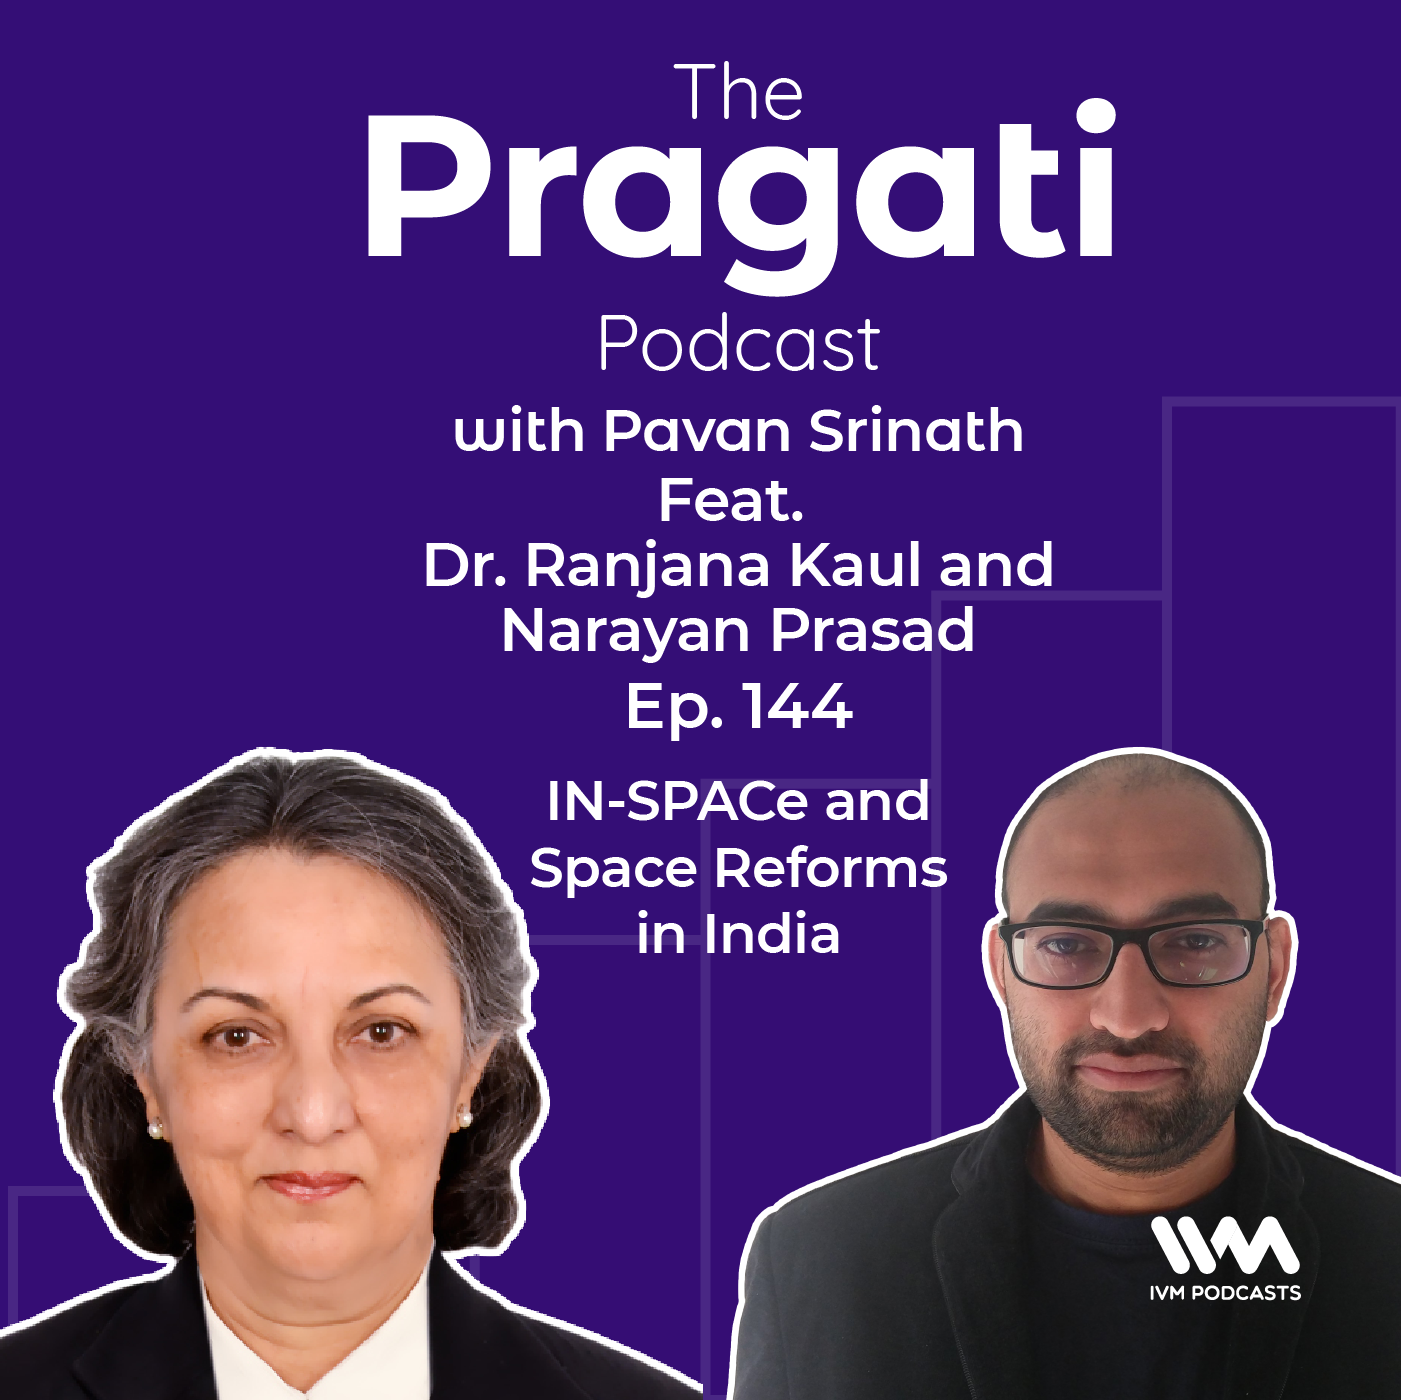 Ep. 144: IN-SPACe and Space Reforms in India